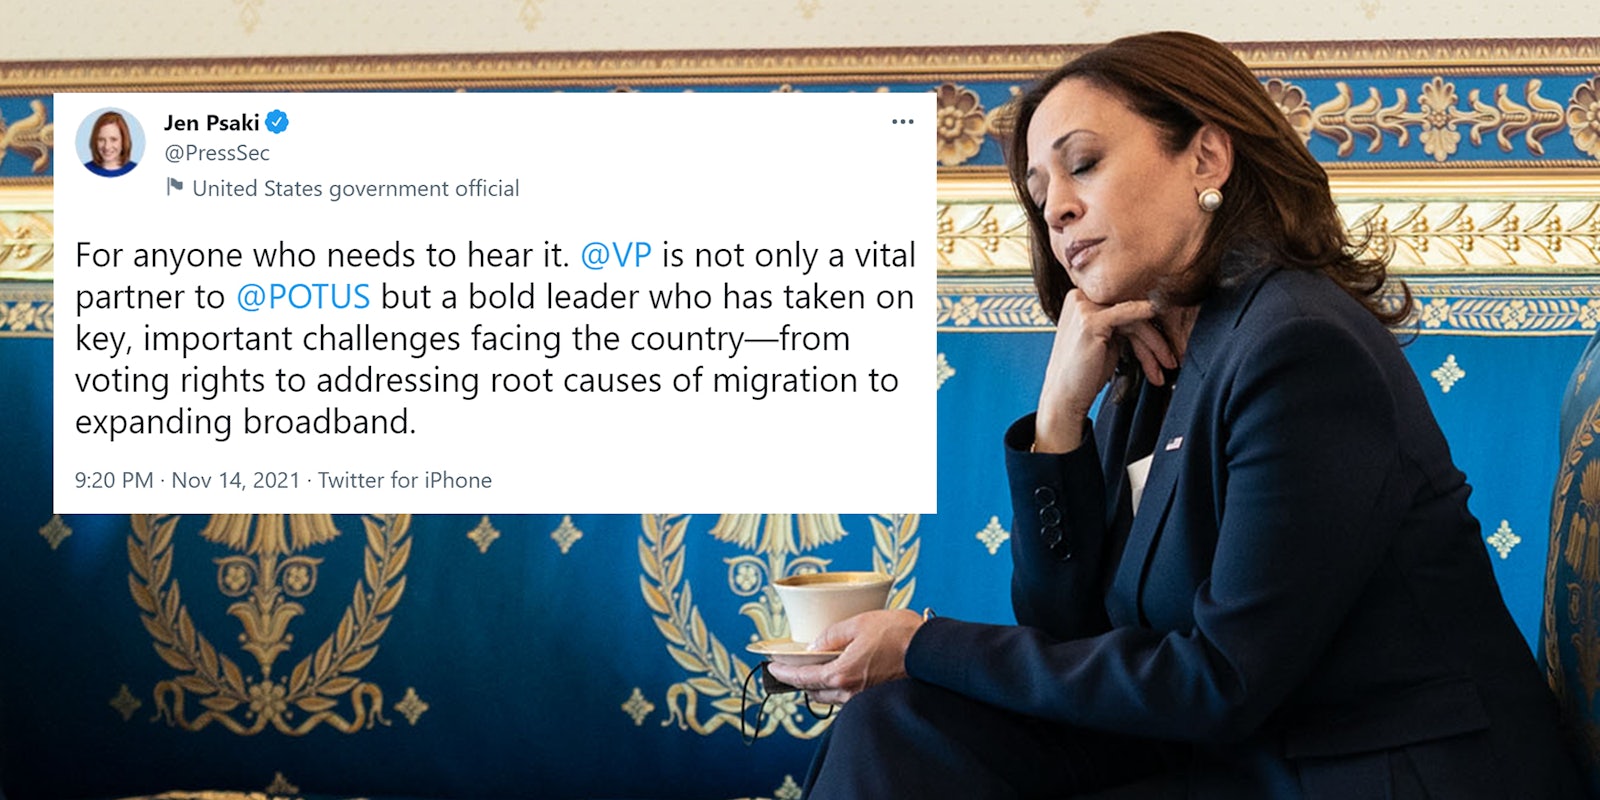 Kamala Harris with eyes closed, holding cup and saucer with @jenpsaki tweet 'For anyone who needs to hear it. @VP is not only a vital partner to @POTUS but a bold leader who has taken on key, important challenges facing the country-from voting rights to addressing root causes of migration to expanding broadband.'